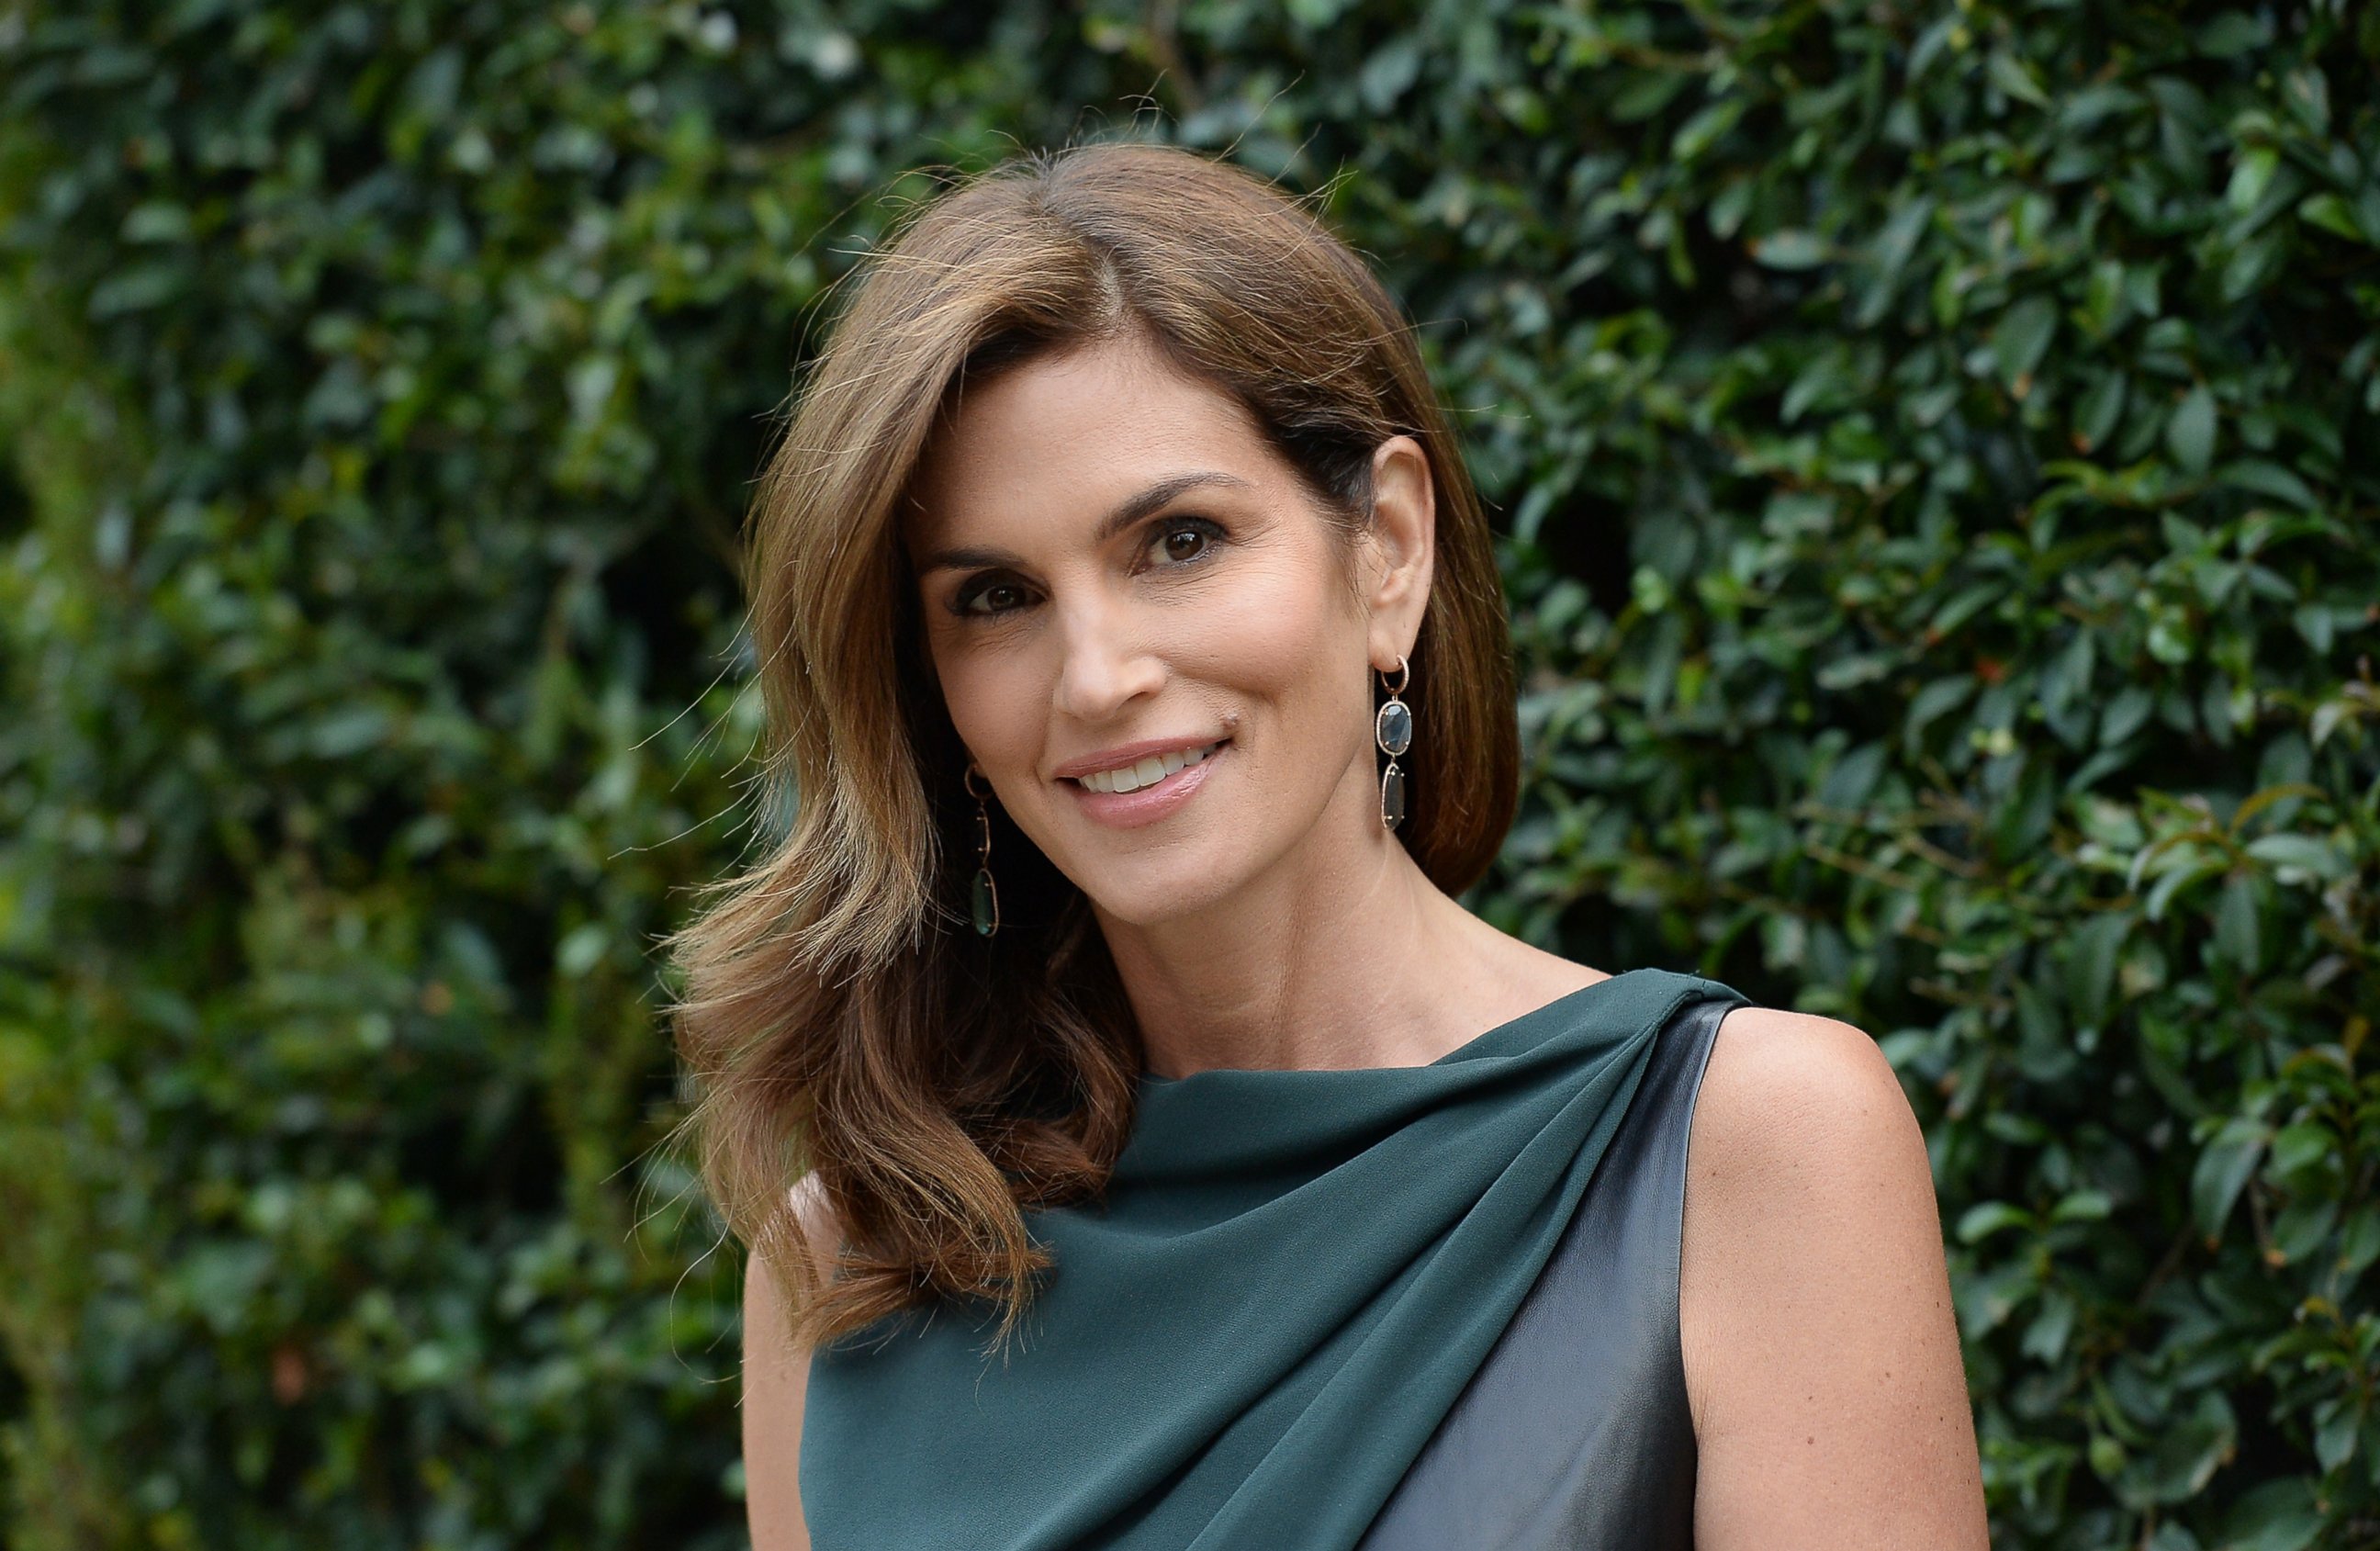 PHOTO: Cindy Crawford attends an event at a private residence on May 31, 2013 in Los Angeles.